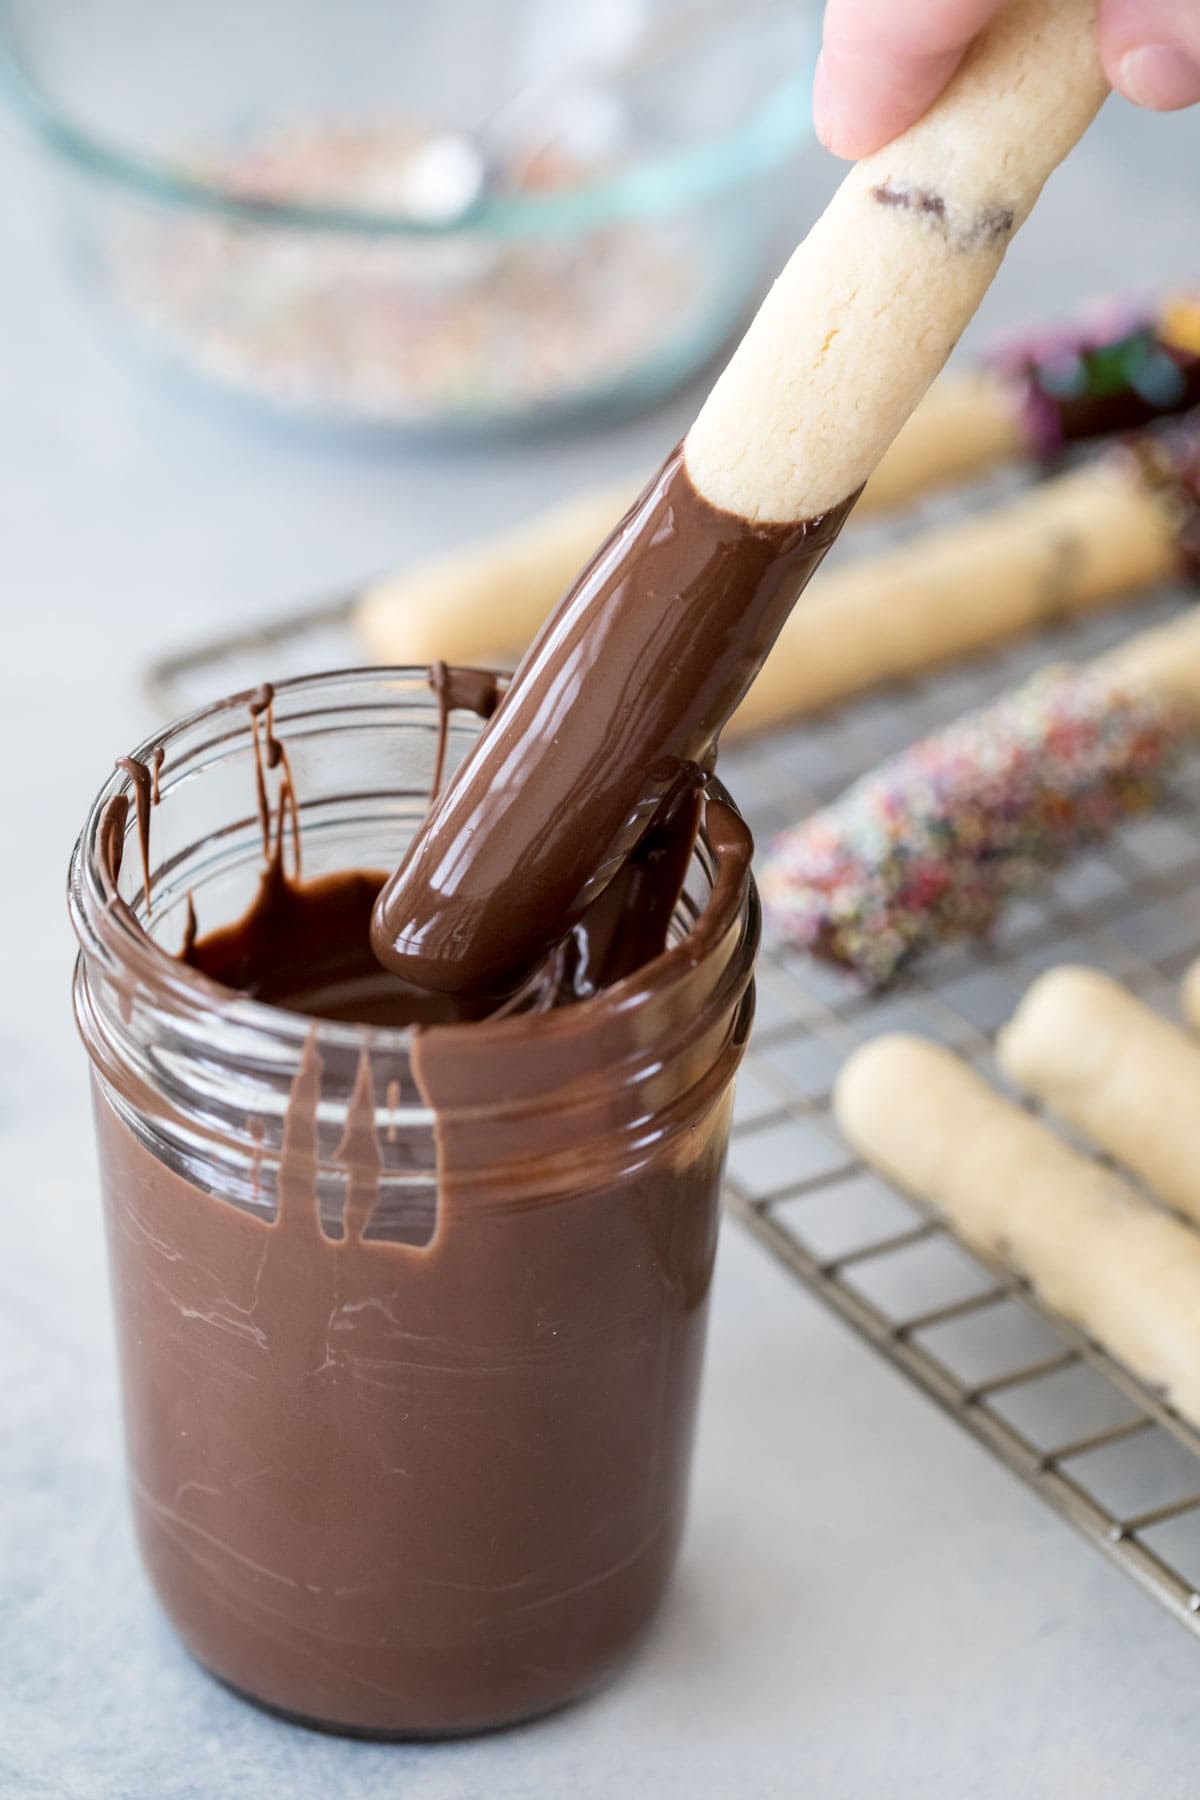 dipping a cookie stick into a jar of chocolate